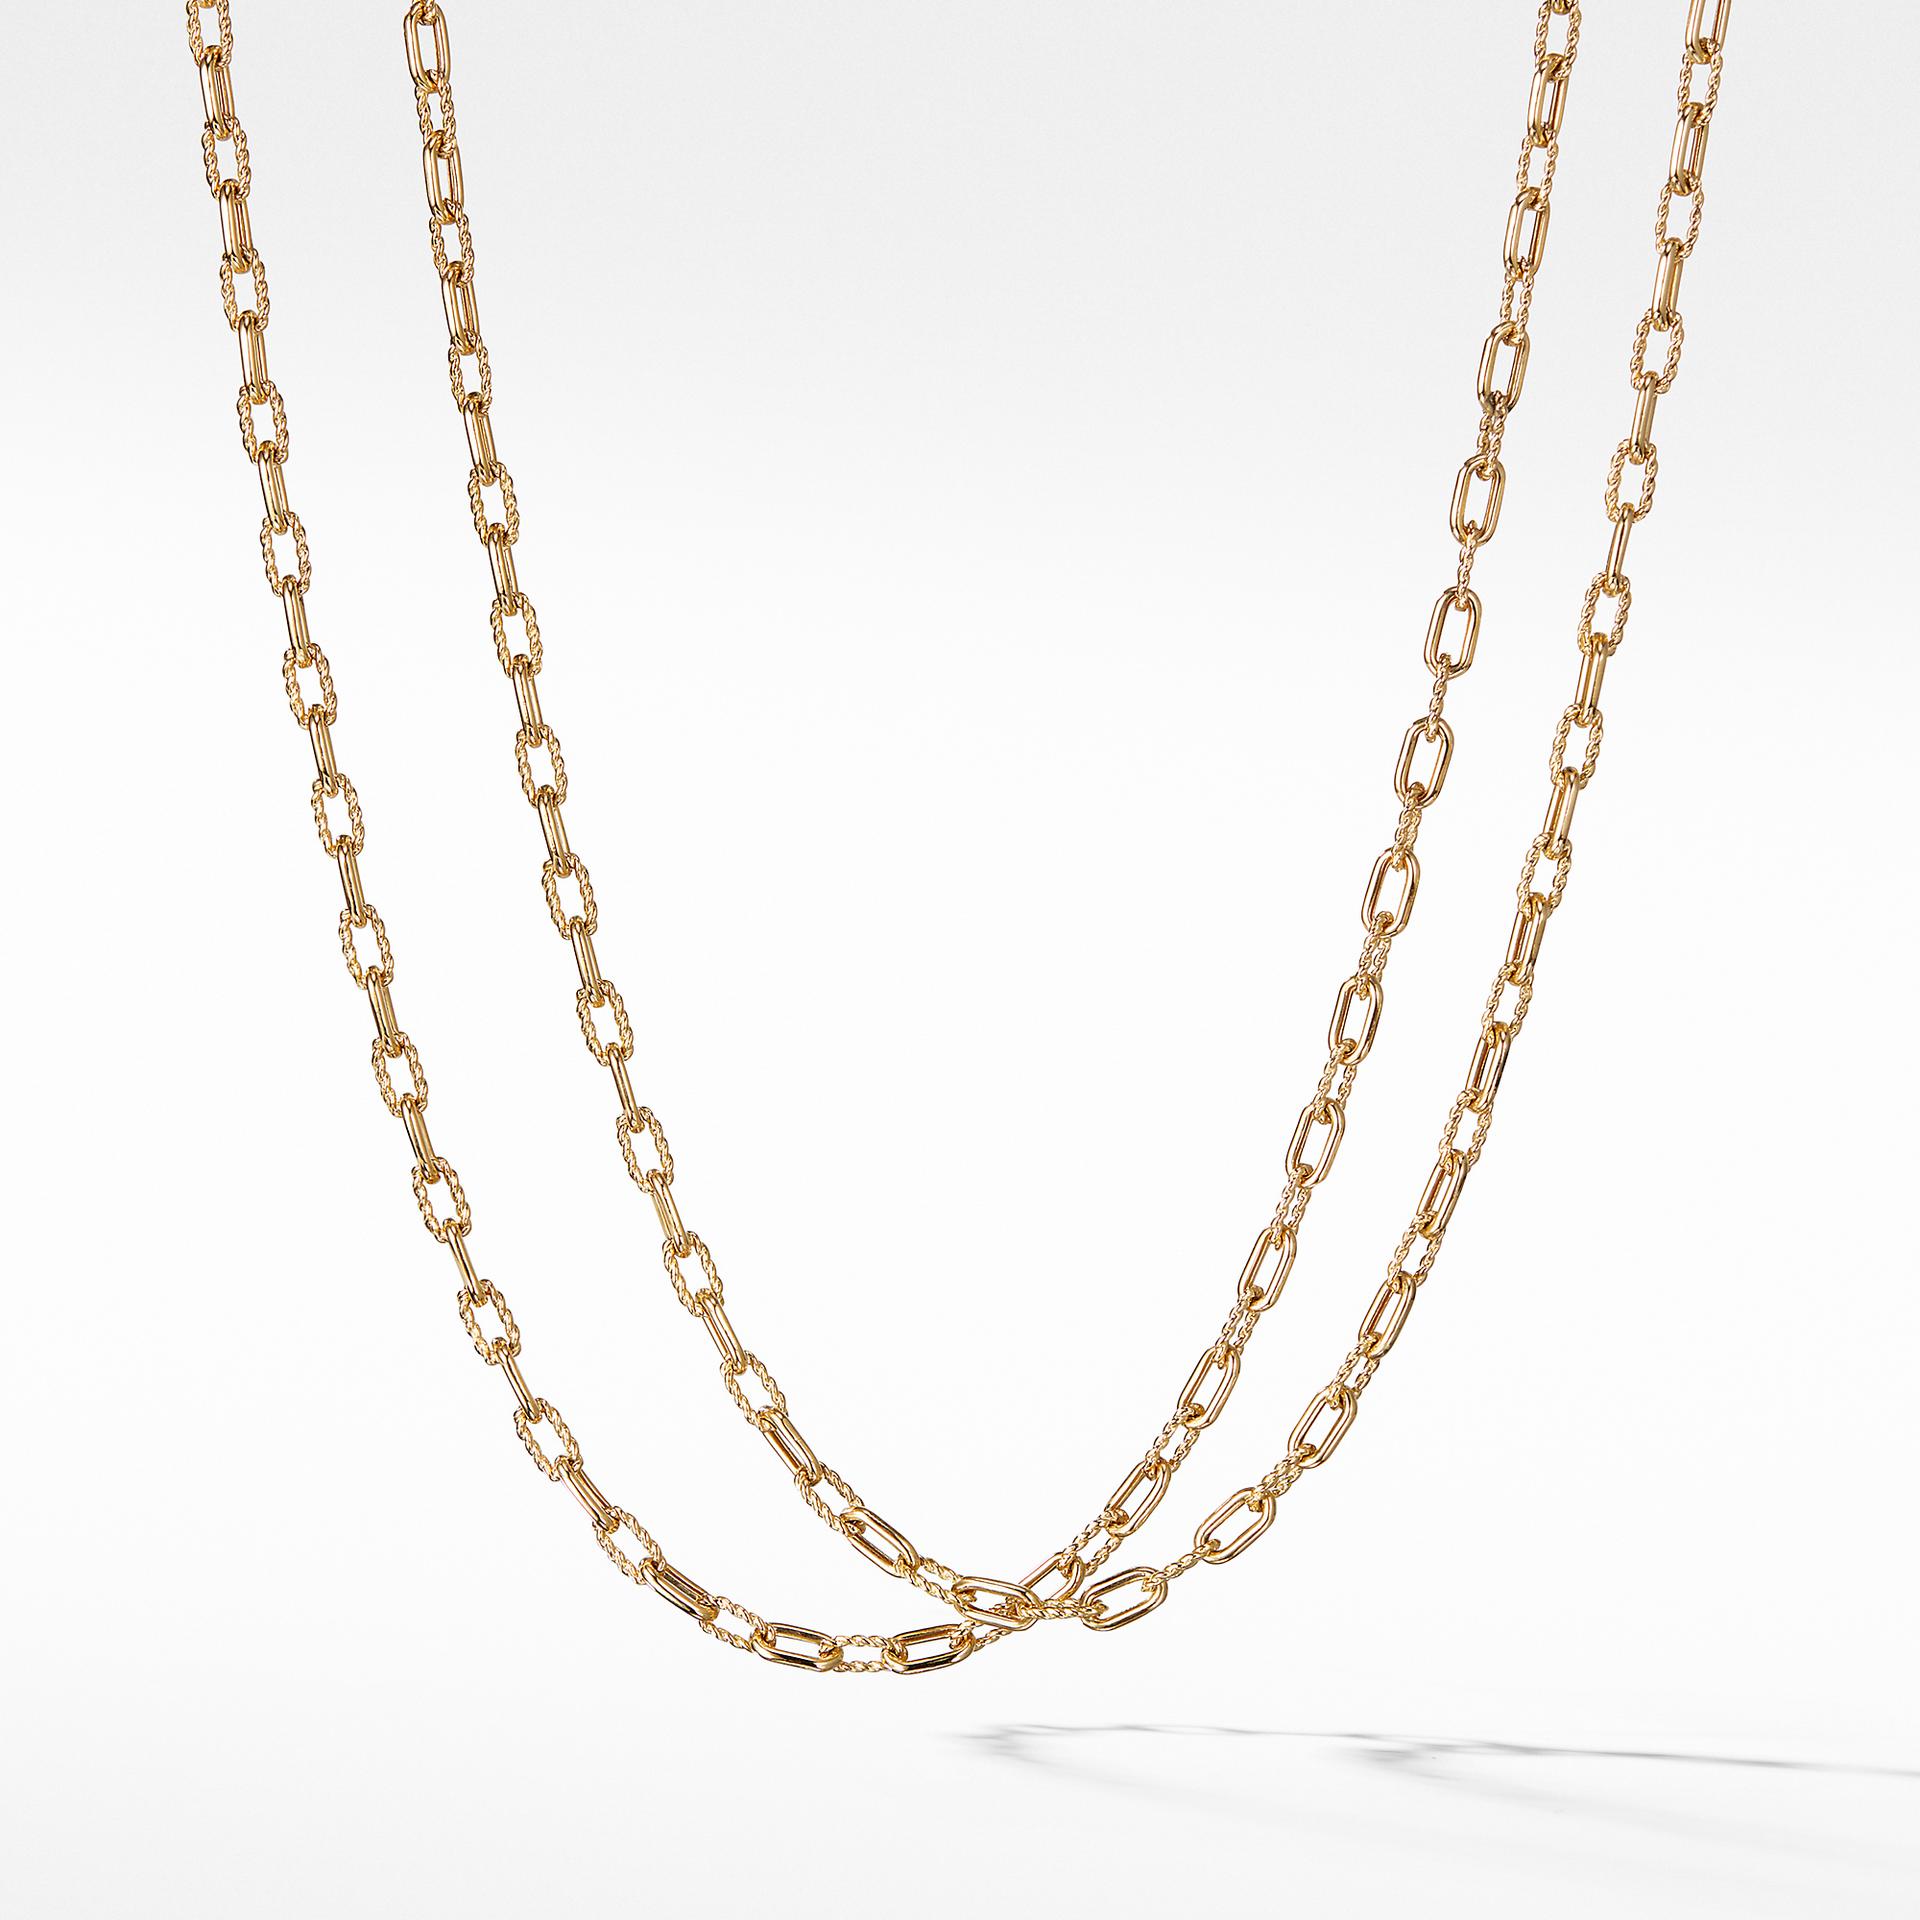 David Yurman Madison Extra Small Necklace in Yellow Gold, 18" 0